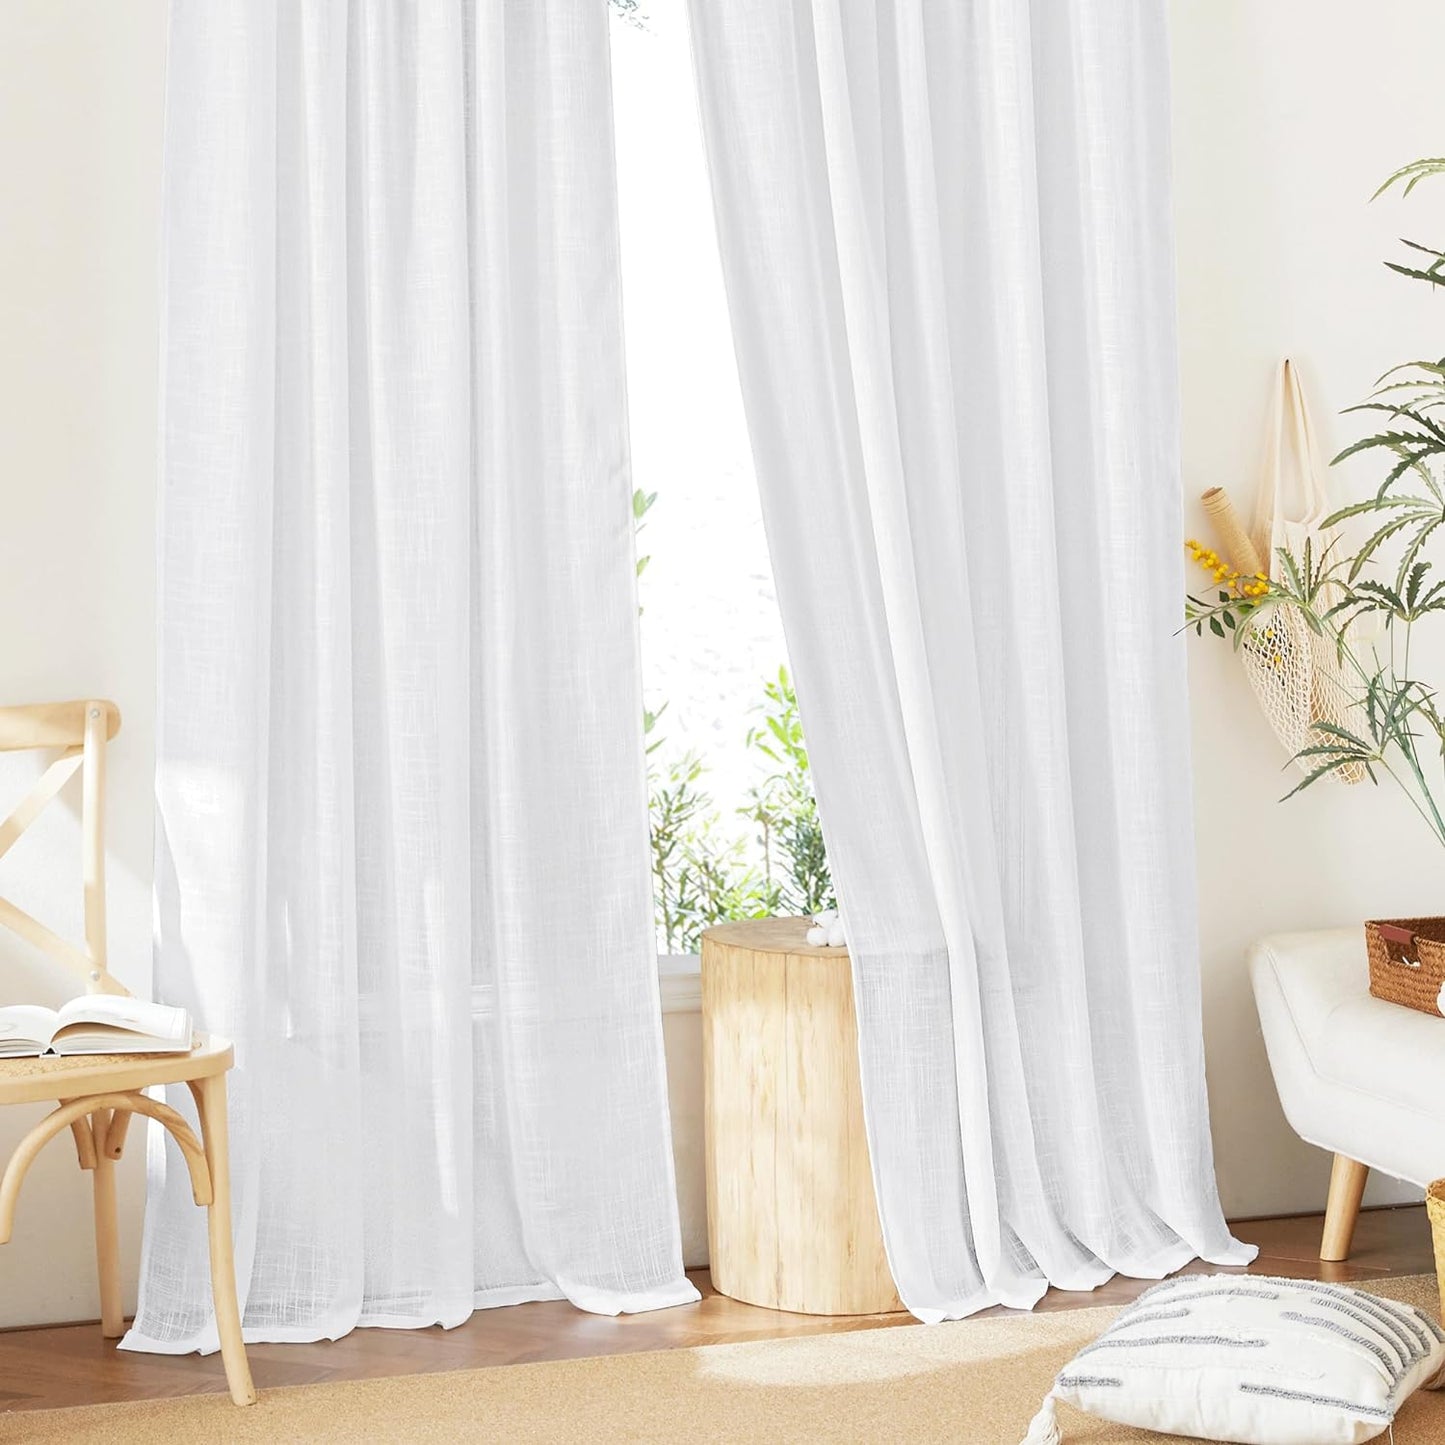 NICETOWN White Curtains Sheer - Semi Sheer Window Covering, Light & Airy Privacy Rod Pocket Back Tab Pinche Pleated Drapes for Bedroom Living Room Patio Glass Door, 52 X 63 Inches Long, Set of 2  NICETOWN   